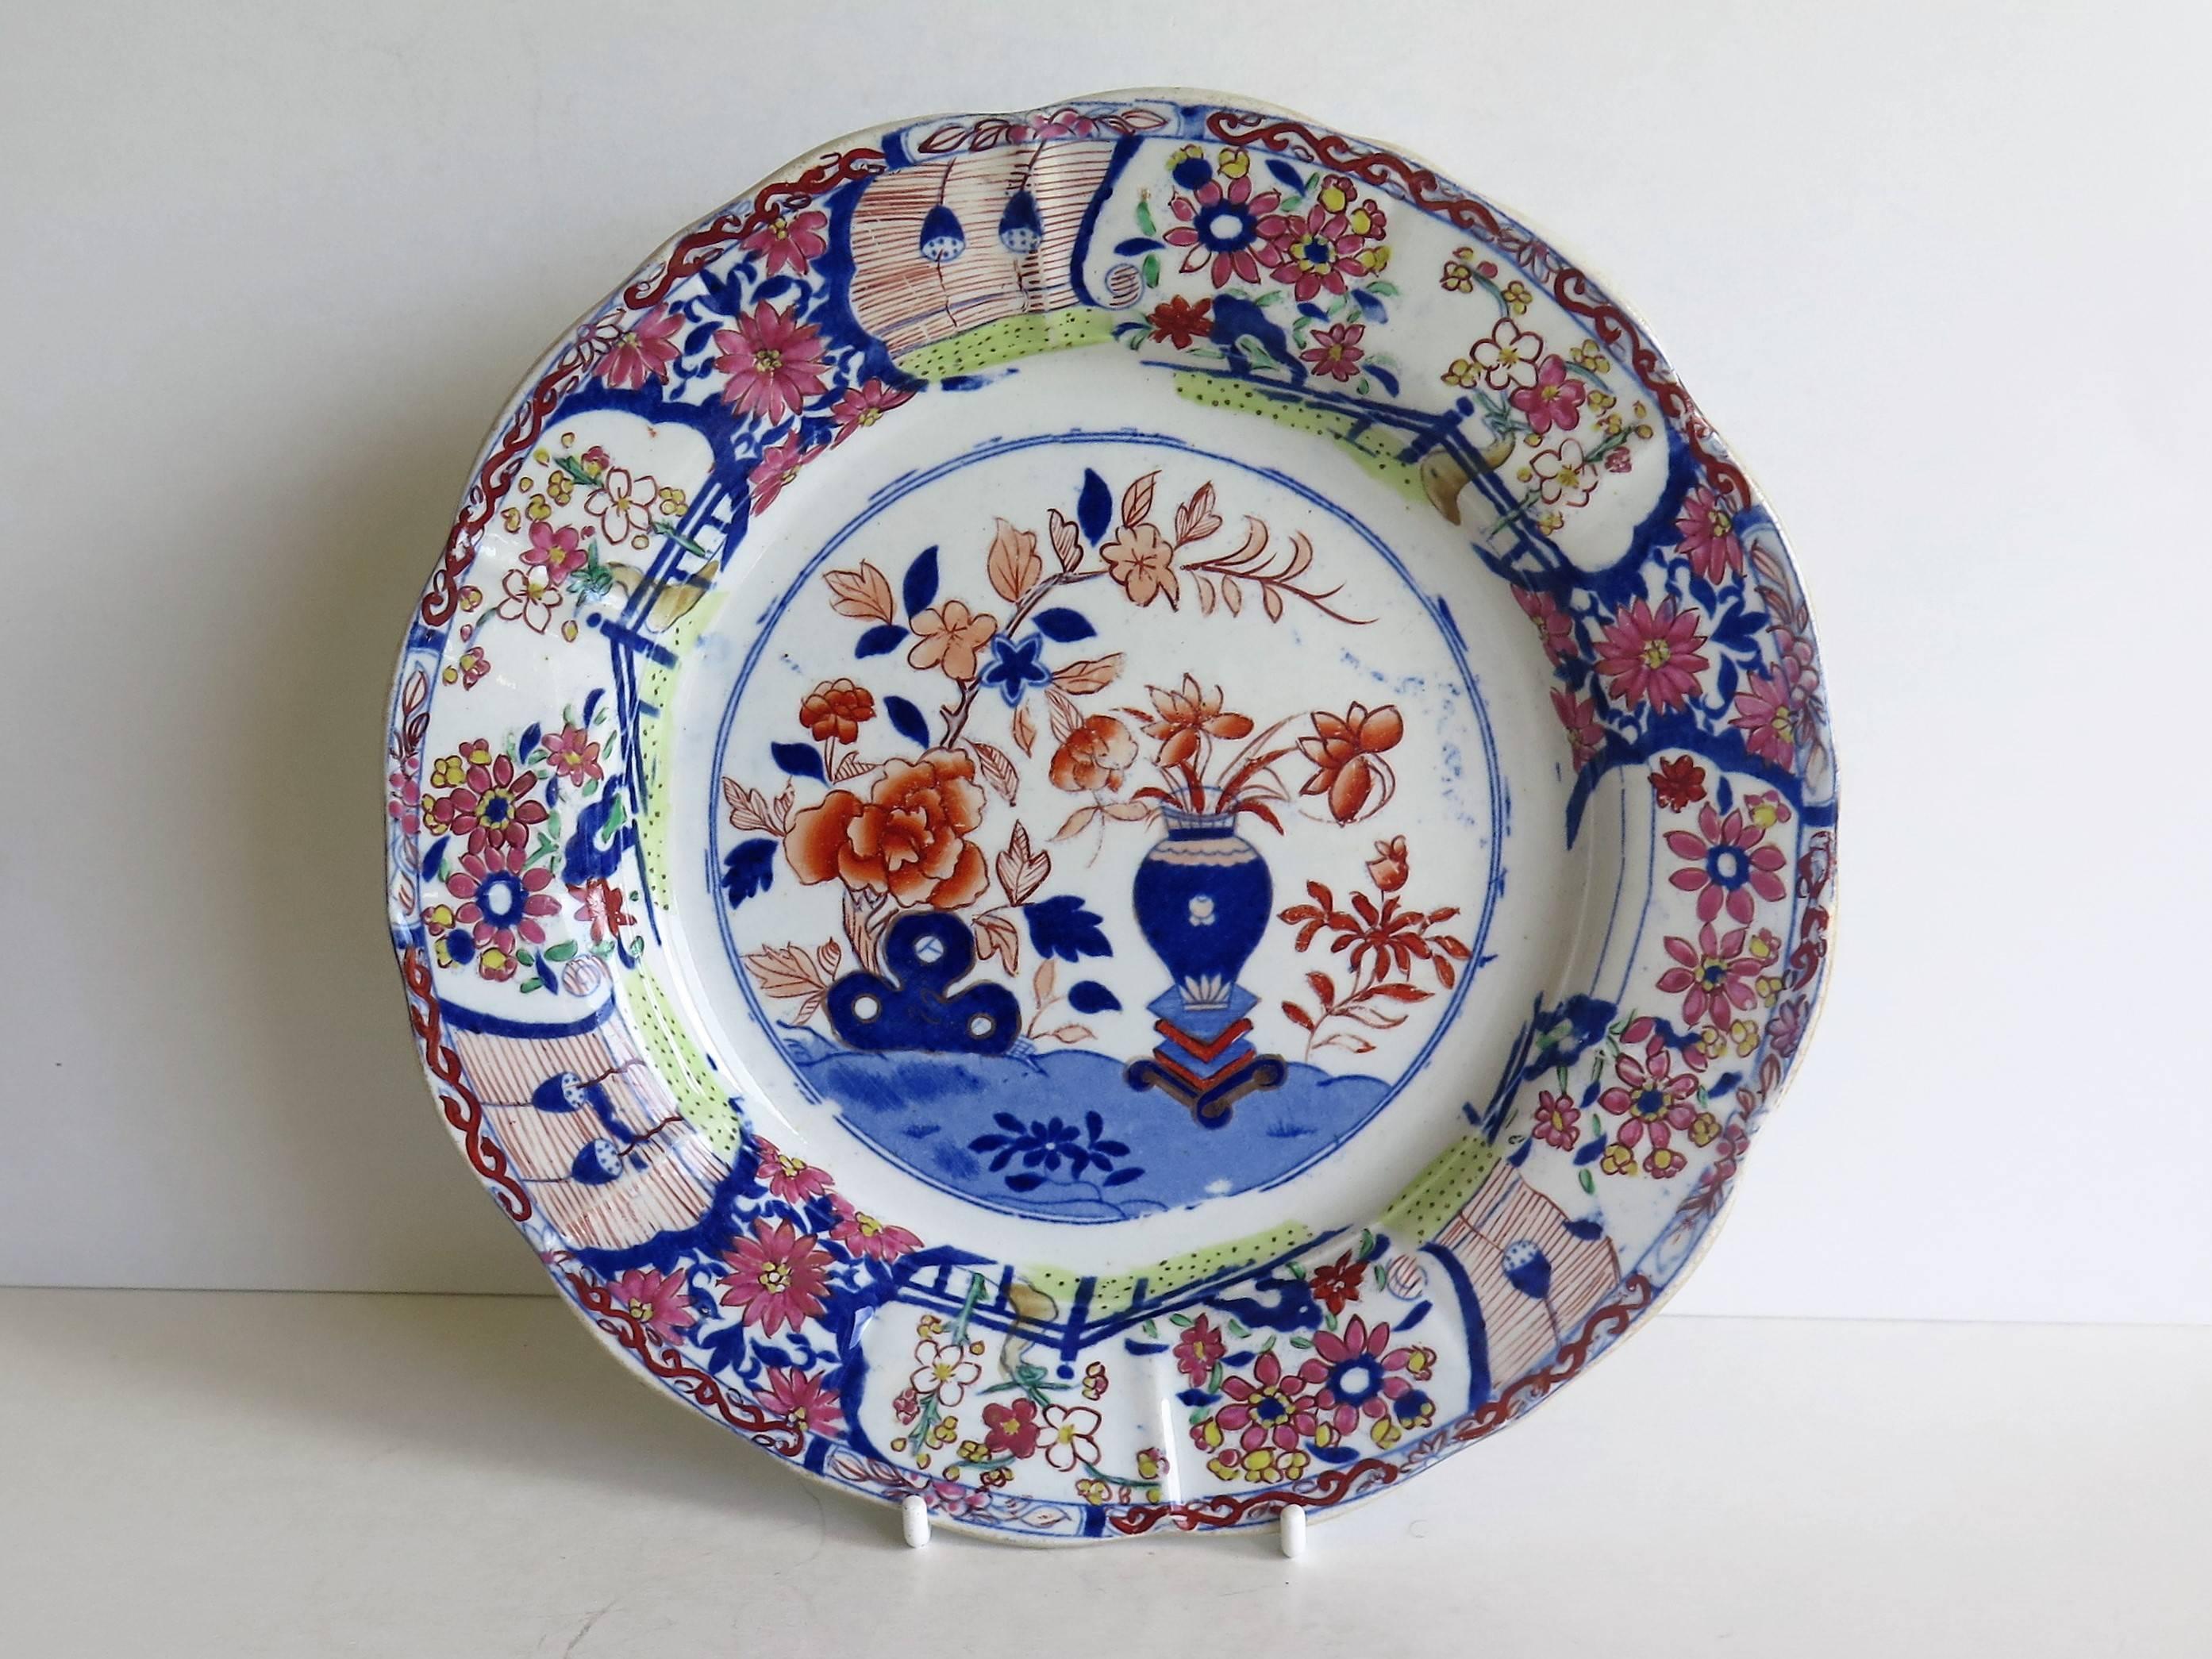 This is a very decorative ironstone pottery desert plate or dish produced by the Mason's factory at Lane Delph, Staffordshire, England, circa 1815.

The plate is circular with radial ribs and a lobed rim.

This desert plate is beautifully and